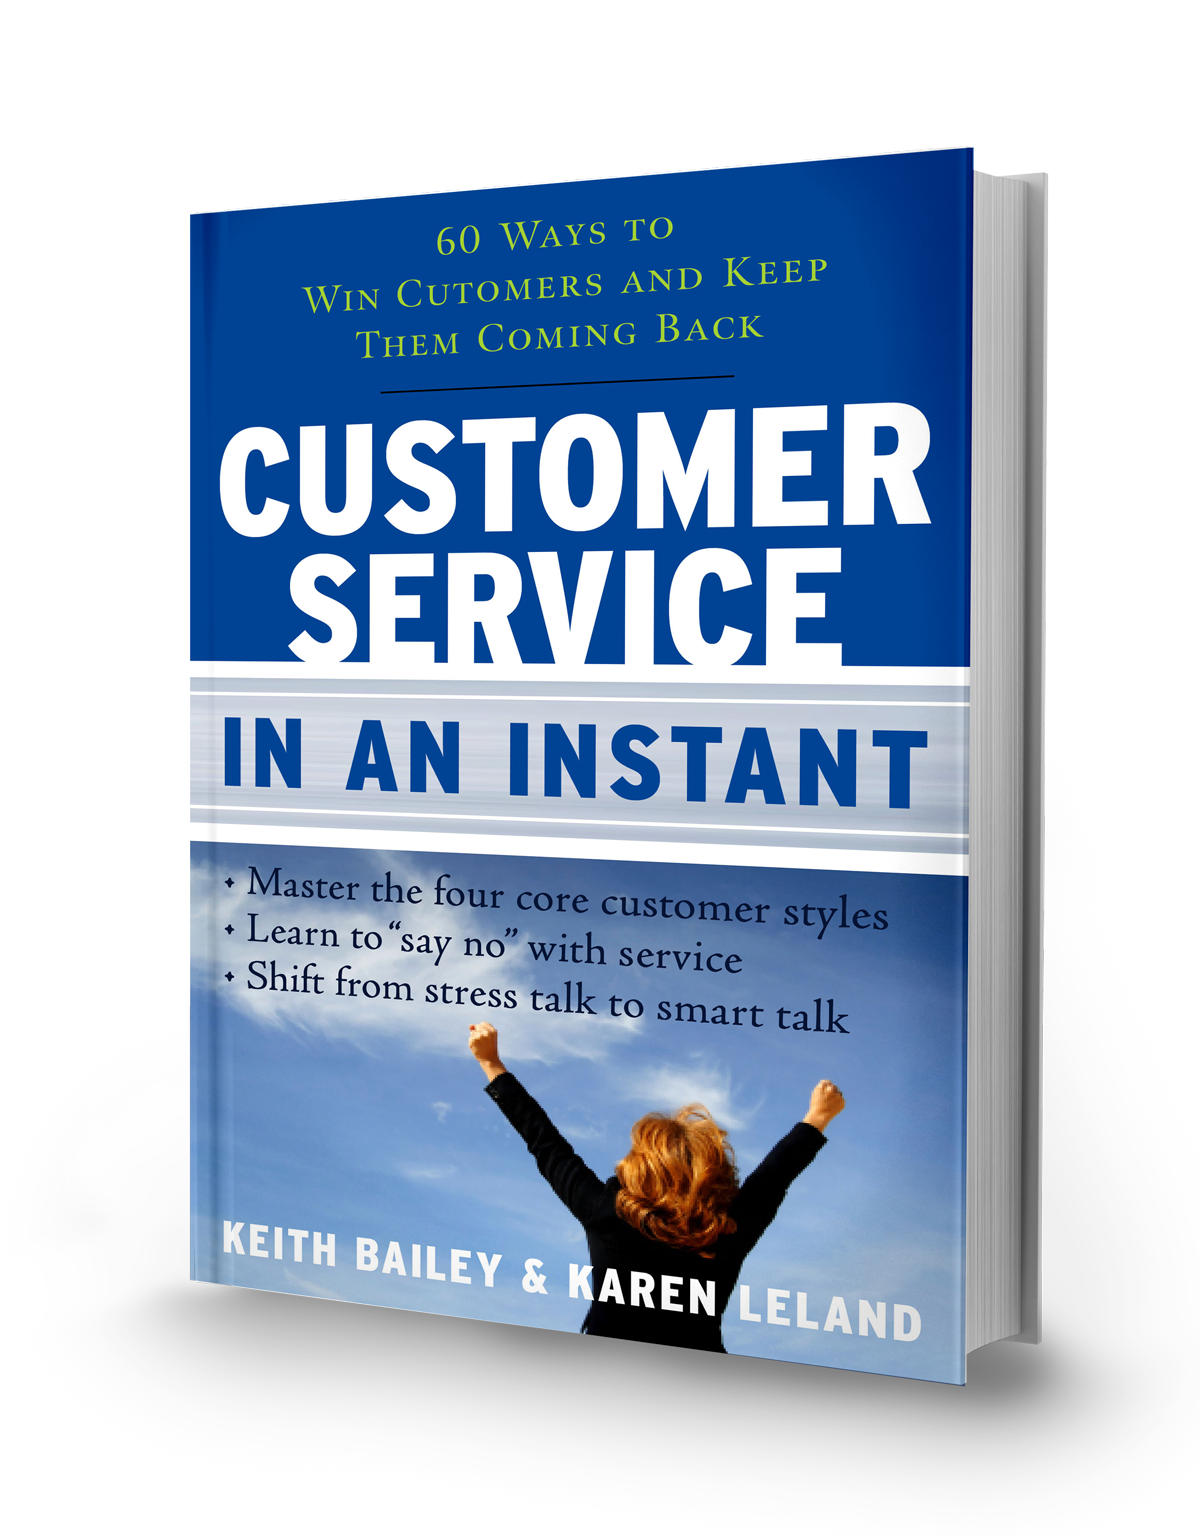 New: Customer Service in an Instant by Keith Bailey and Karen Leland